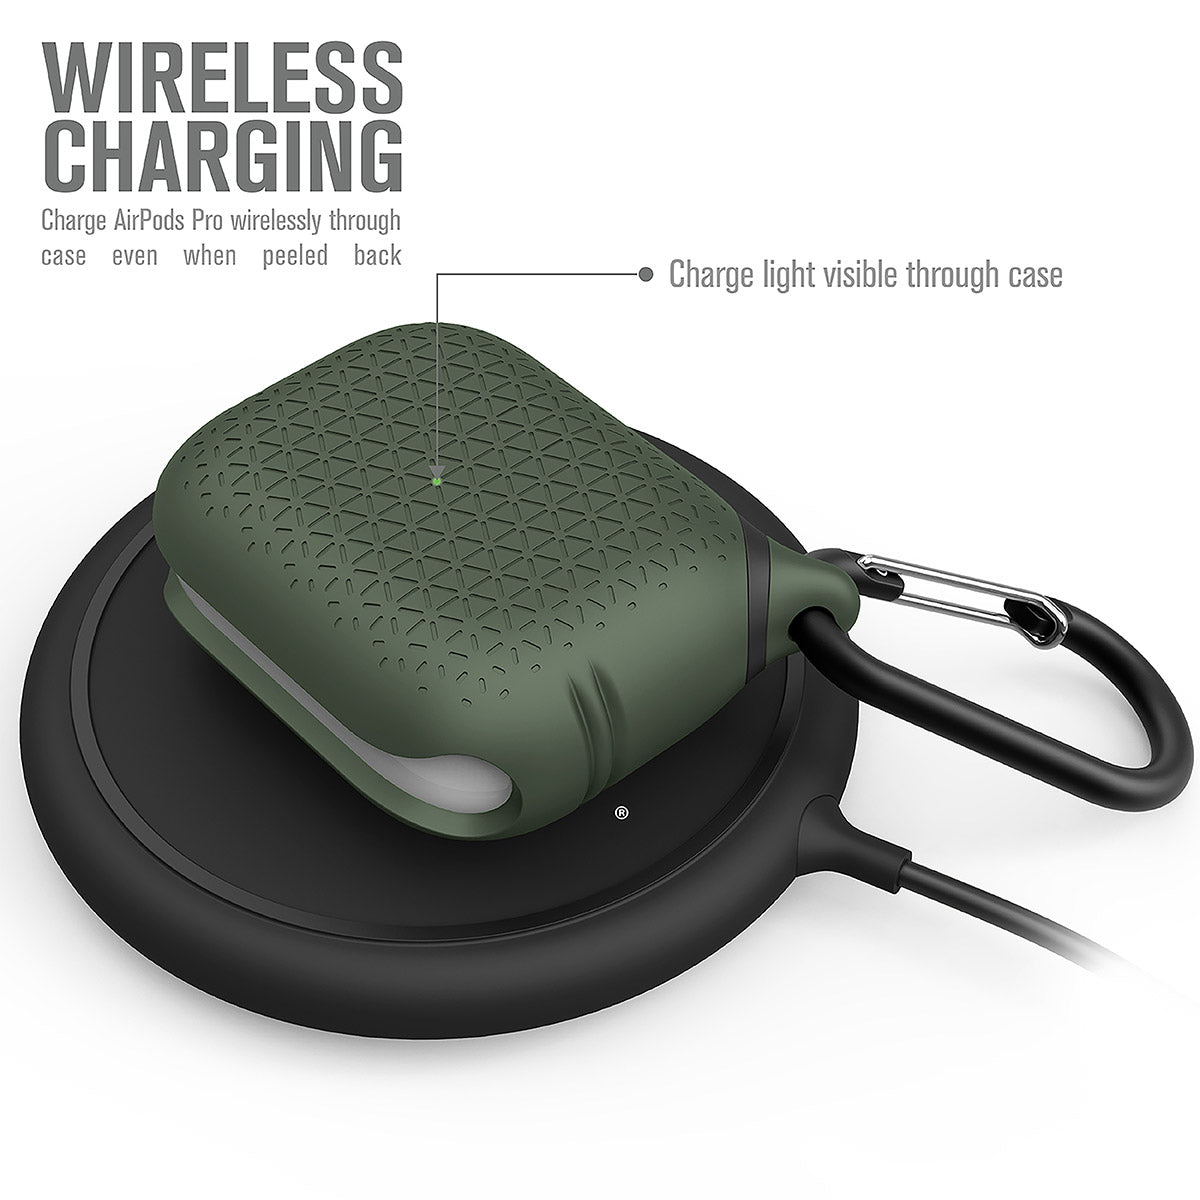 catalyst airpods pro gen 2 1 waterproof case carabiner premium edition army green on top of a wireless charger text reads wireless charging charge airpods pro wirelessly through case even when peeled back charge light visible through case